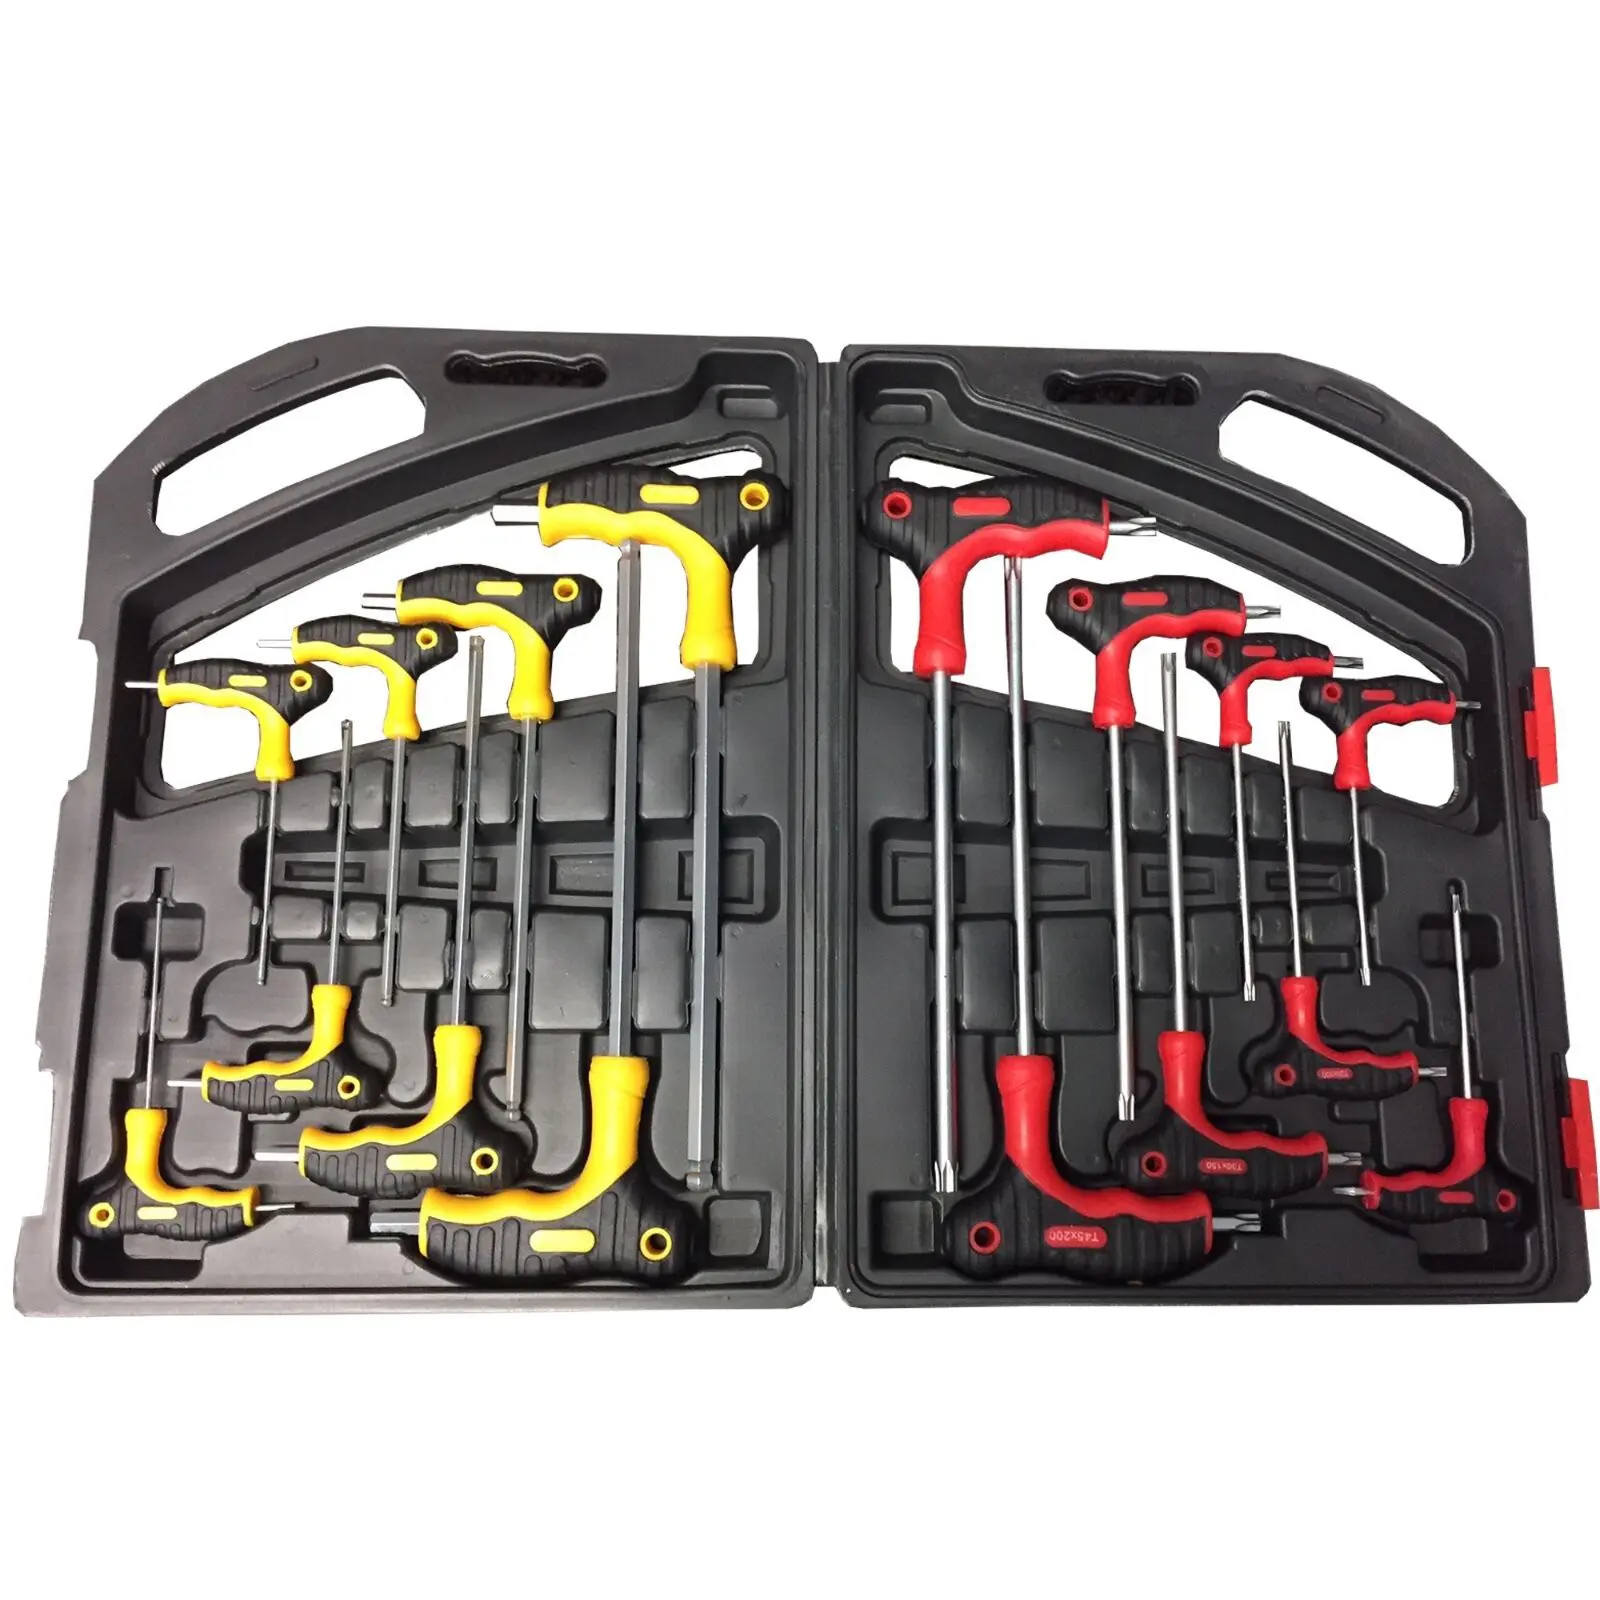 16PCS Repair tool Metric T-Handle Allen Wrench Set Long Arm Torx Star Key and Ball End Hex Wrench Key Set